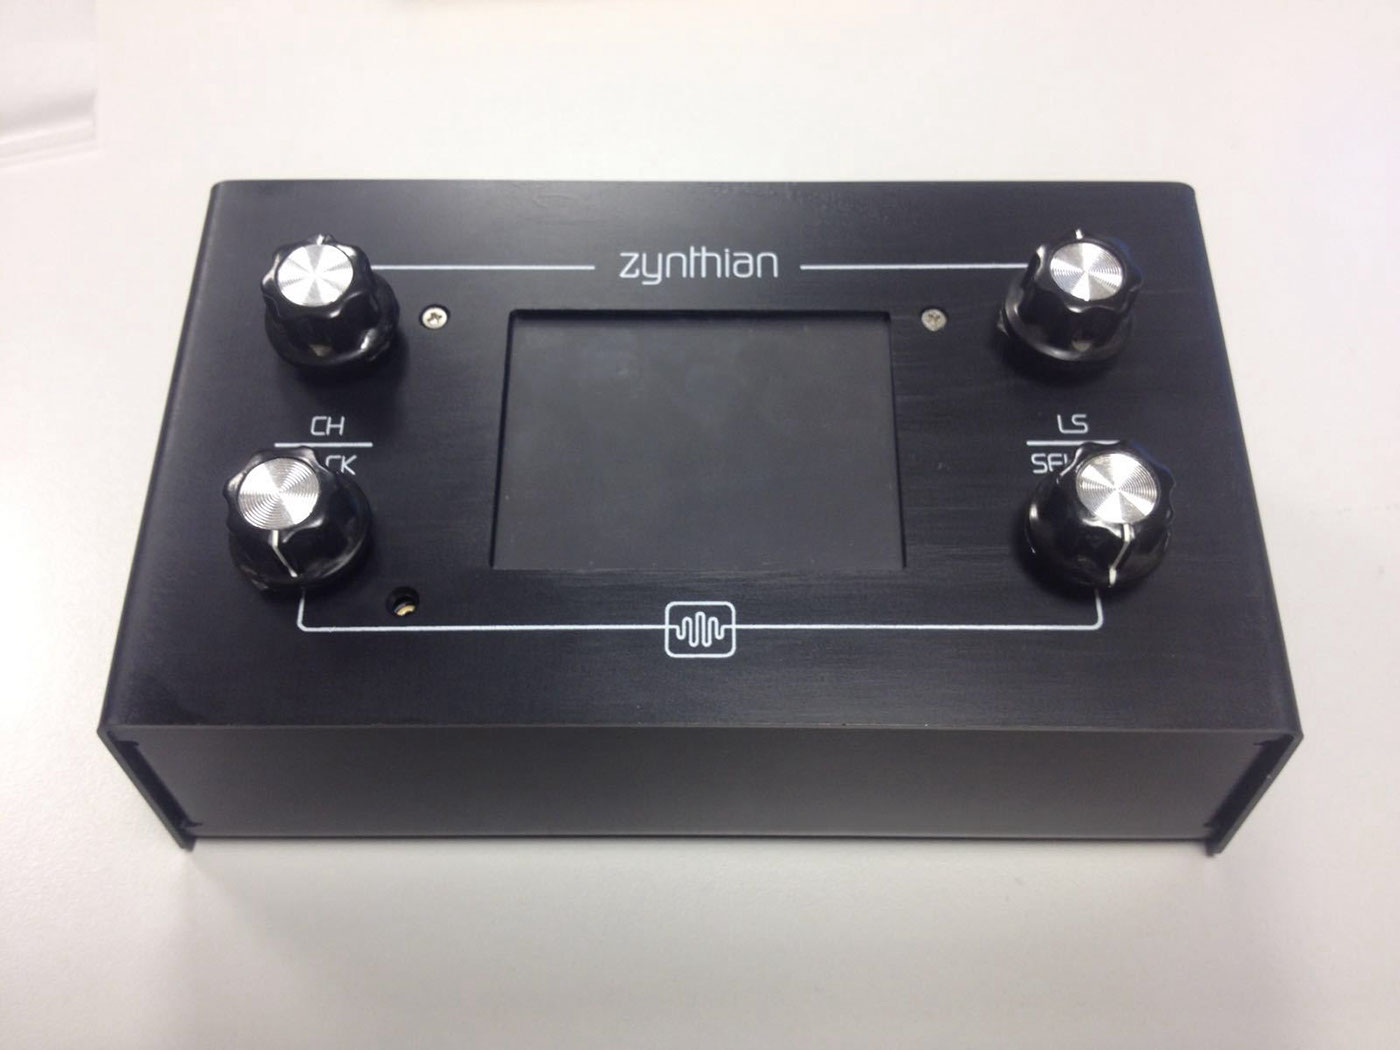 zynthian SYNTH vst music electronic music Interface product design 